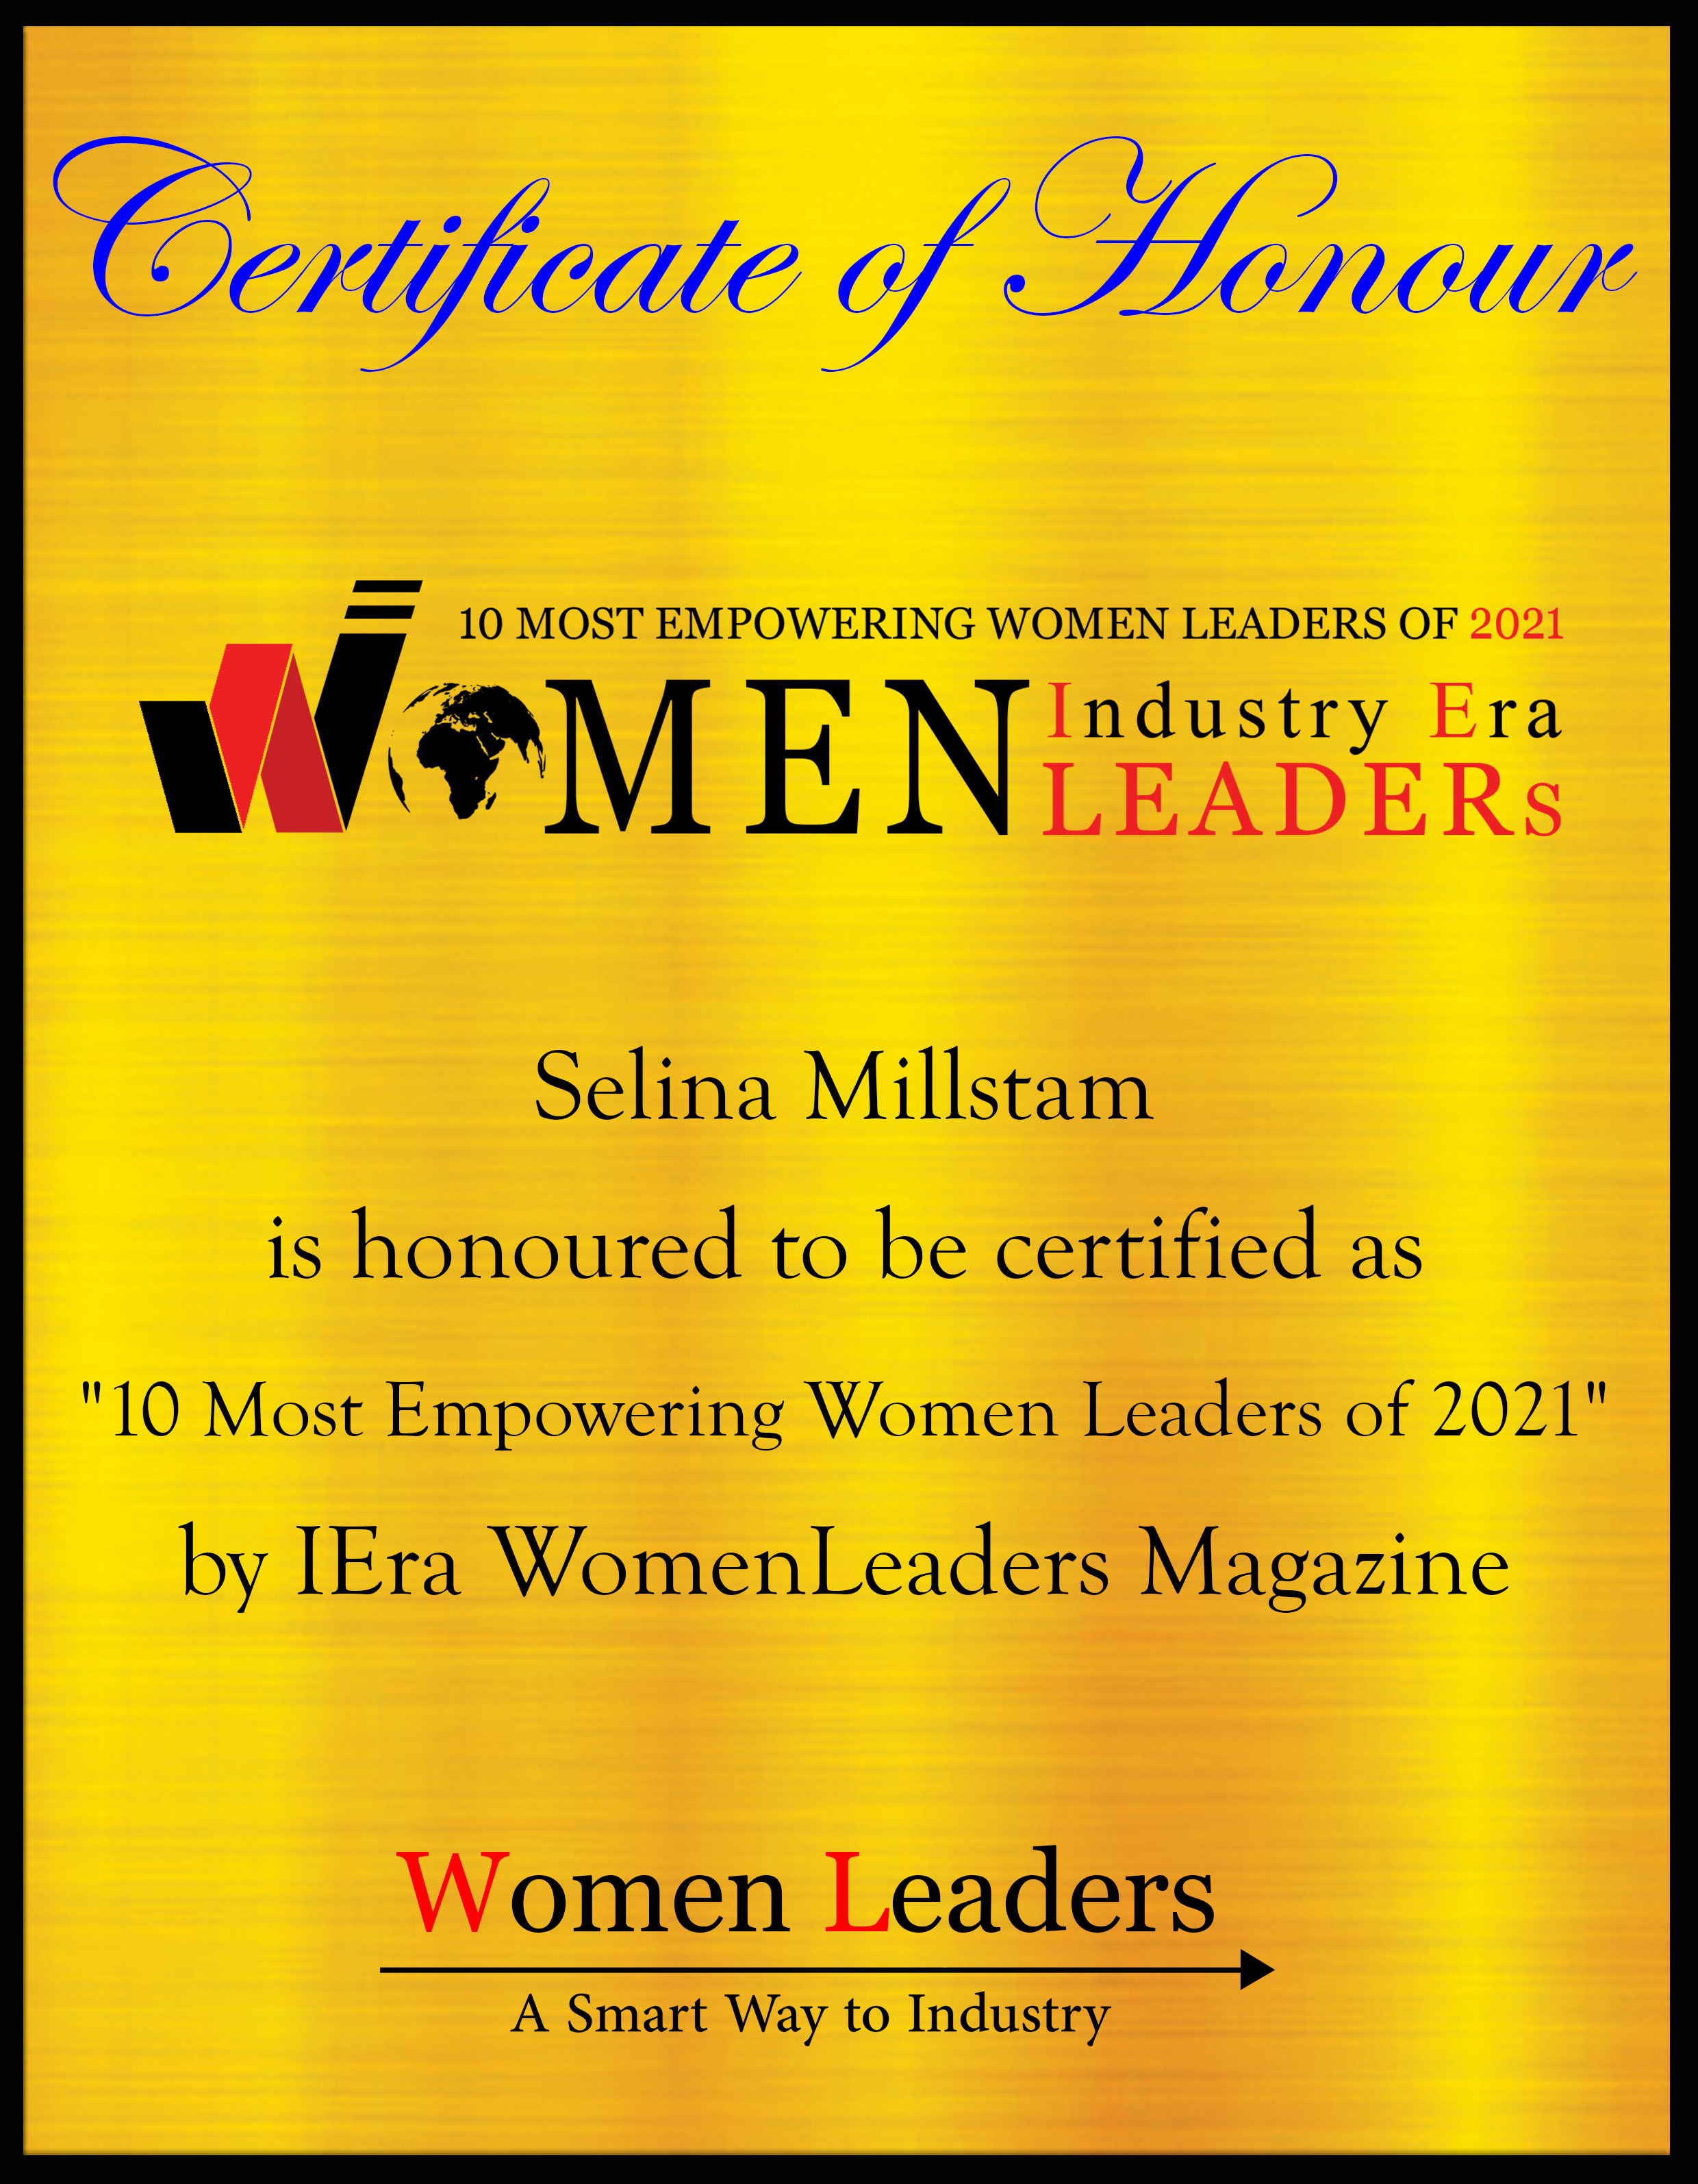 Selina Millstam, Vice President and Head of Talent Management at Ericsson, Most Empowering Women Leaders of 2021